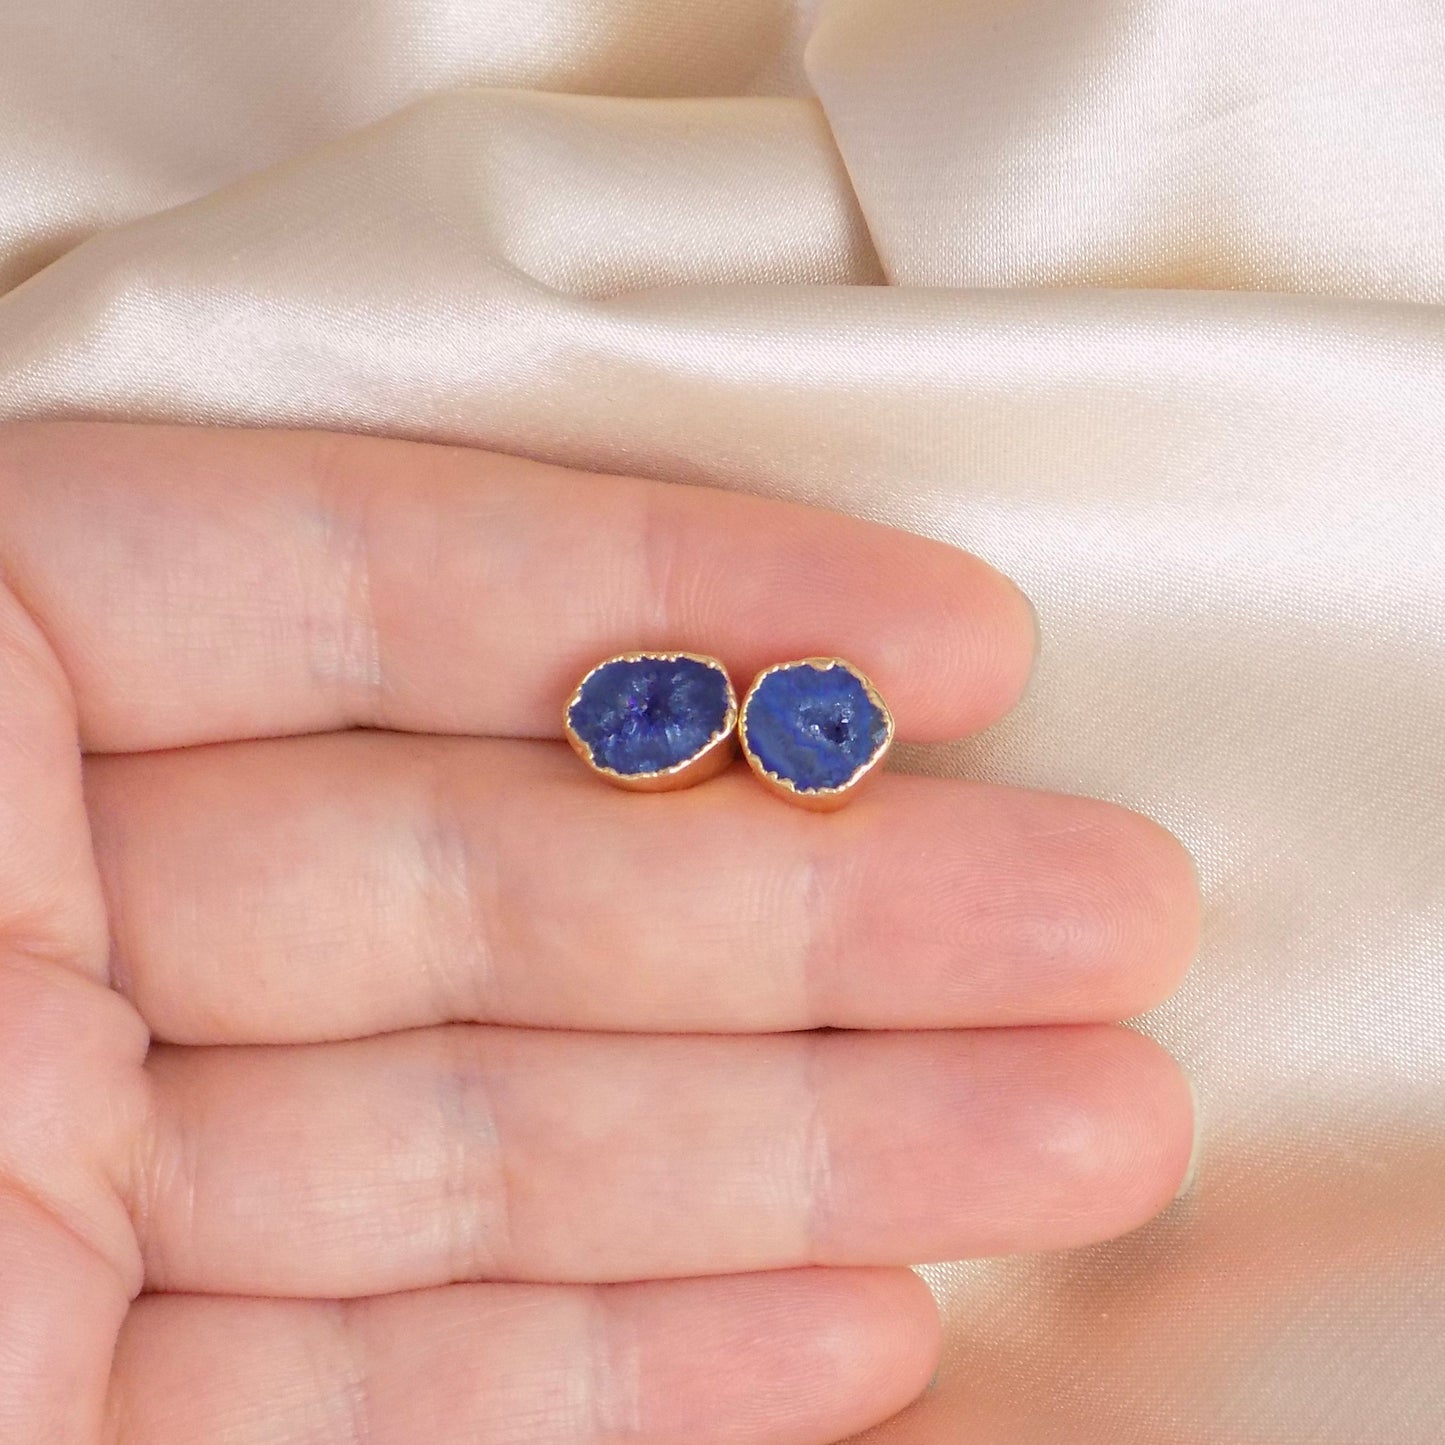 Blue Geode Earrings Stud, Gold Dipped Agate Studs, Mothers Day Gift For Her, G15-93